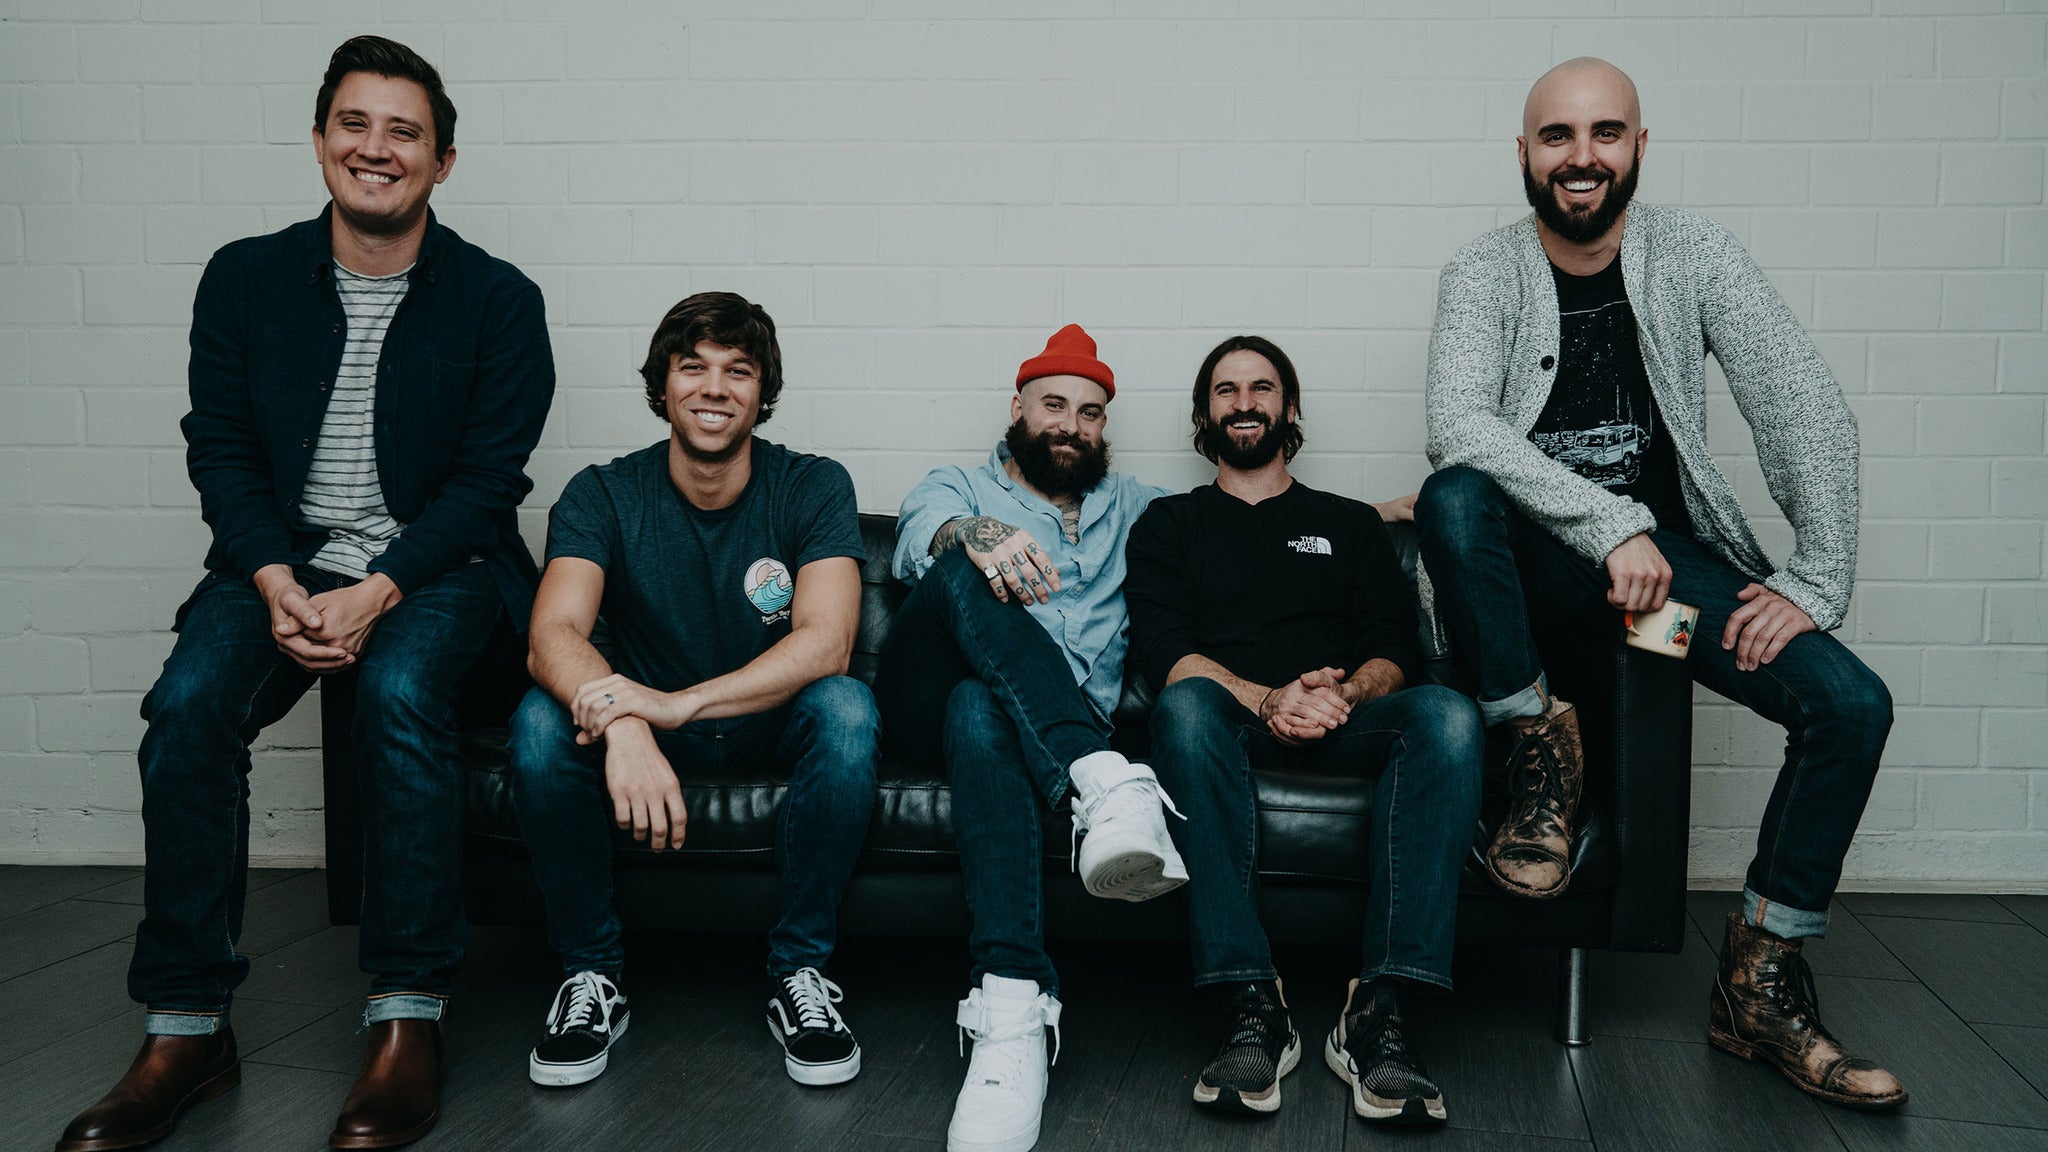 August Burns Red w/ We Came As Romans